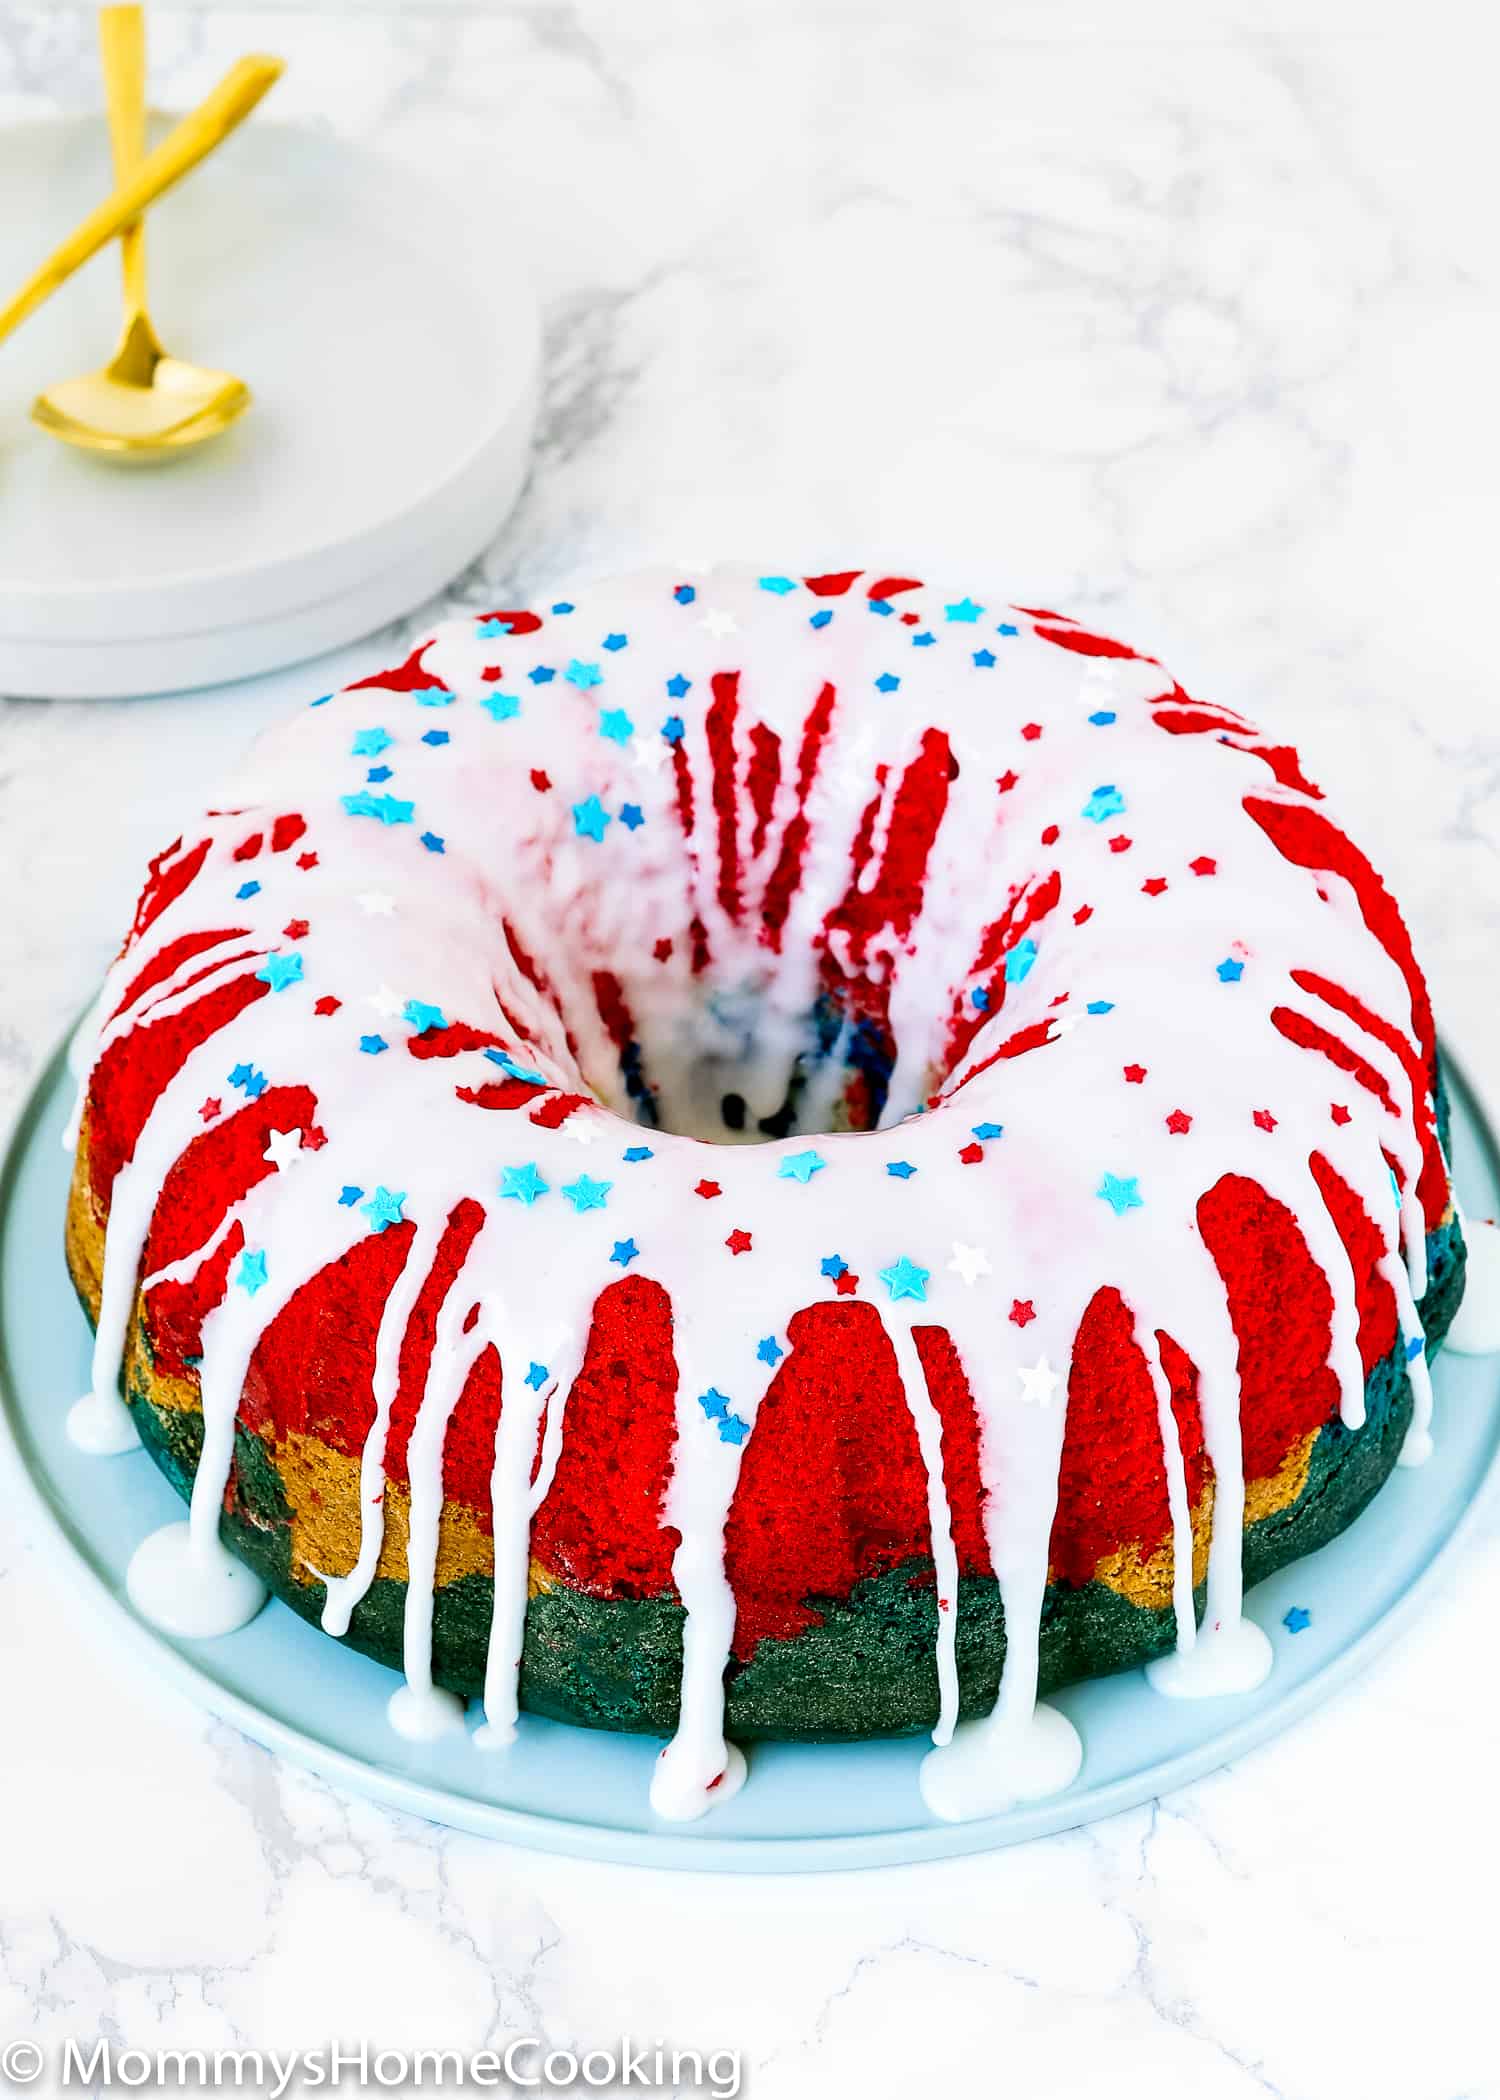 Red, White, and Blue Eggless Bundt Cake with glaze on top.